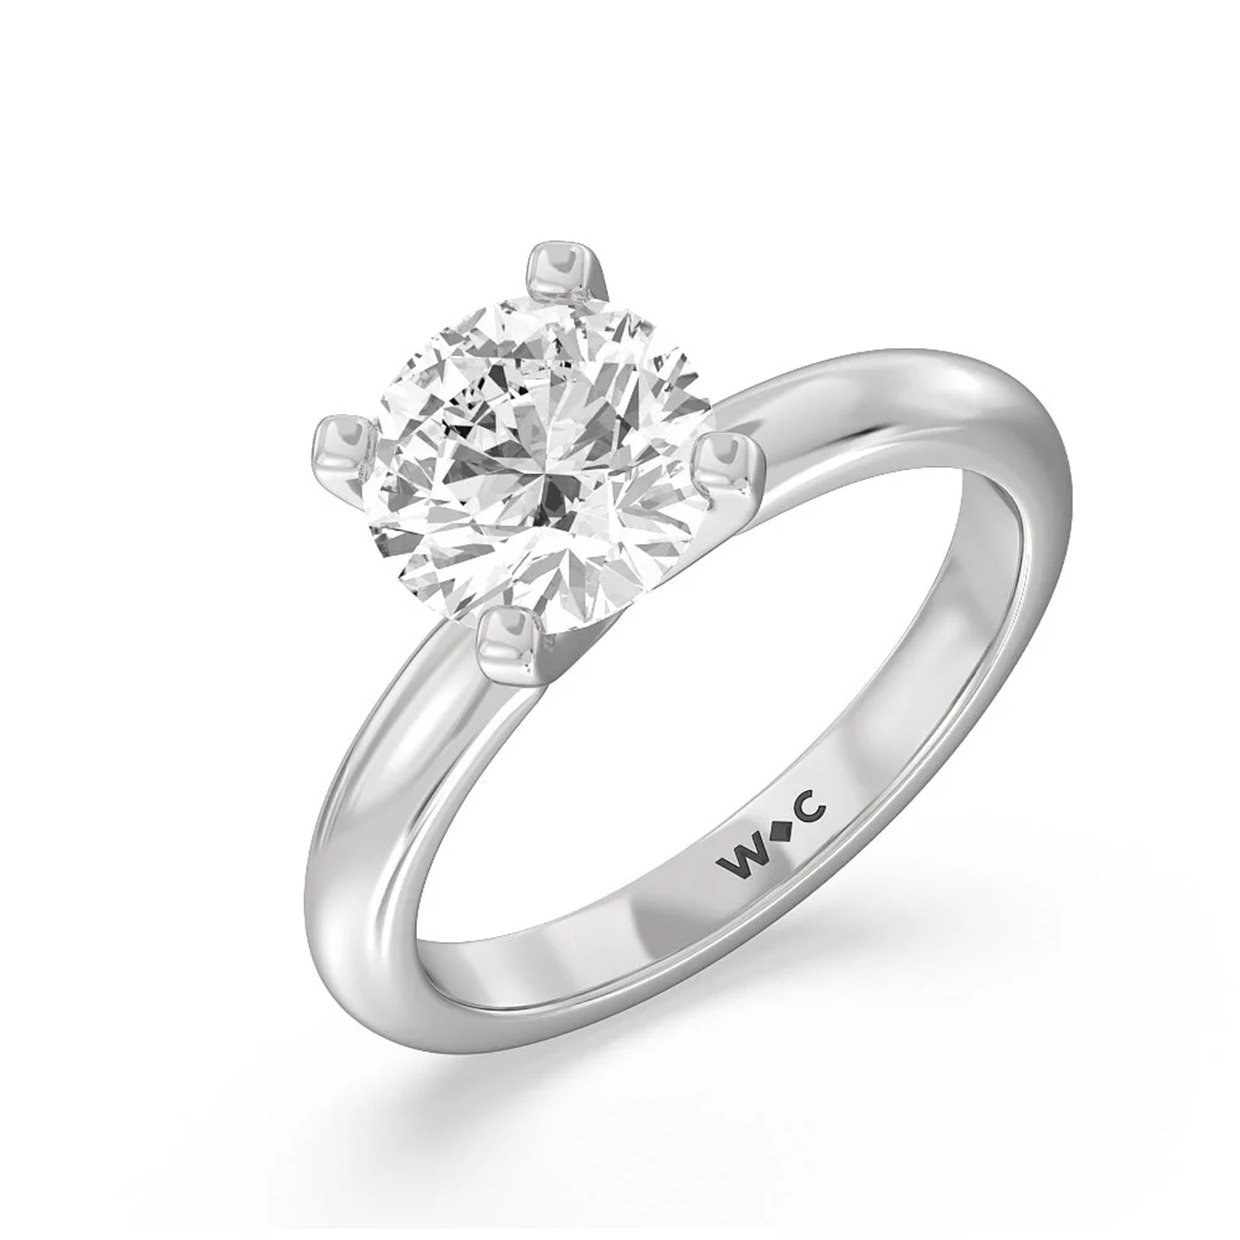 large 4 carat affordable diamond engagement ring by With Clarity